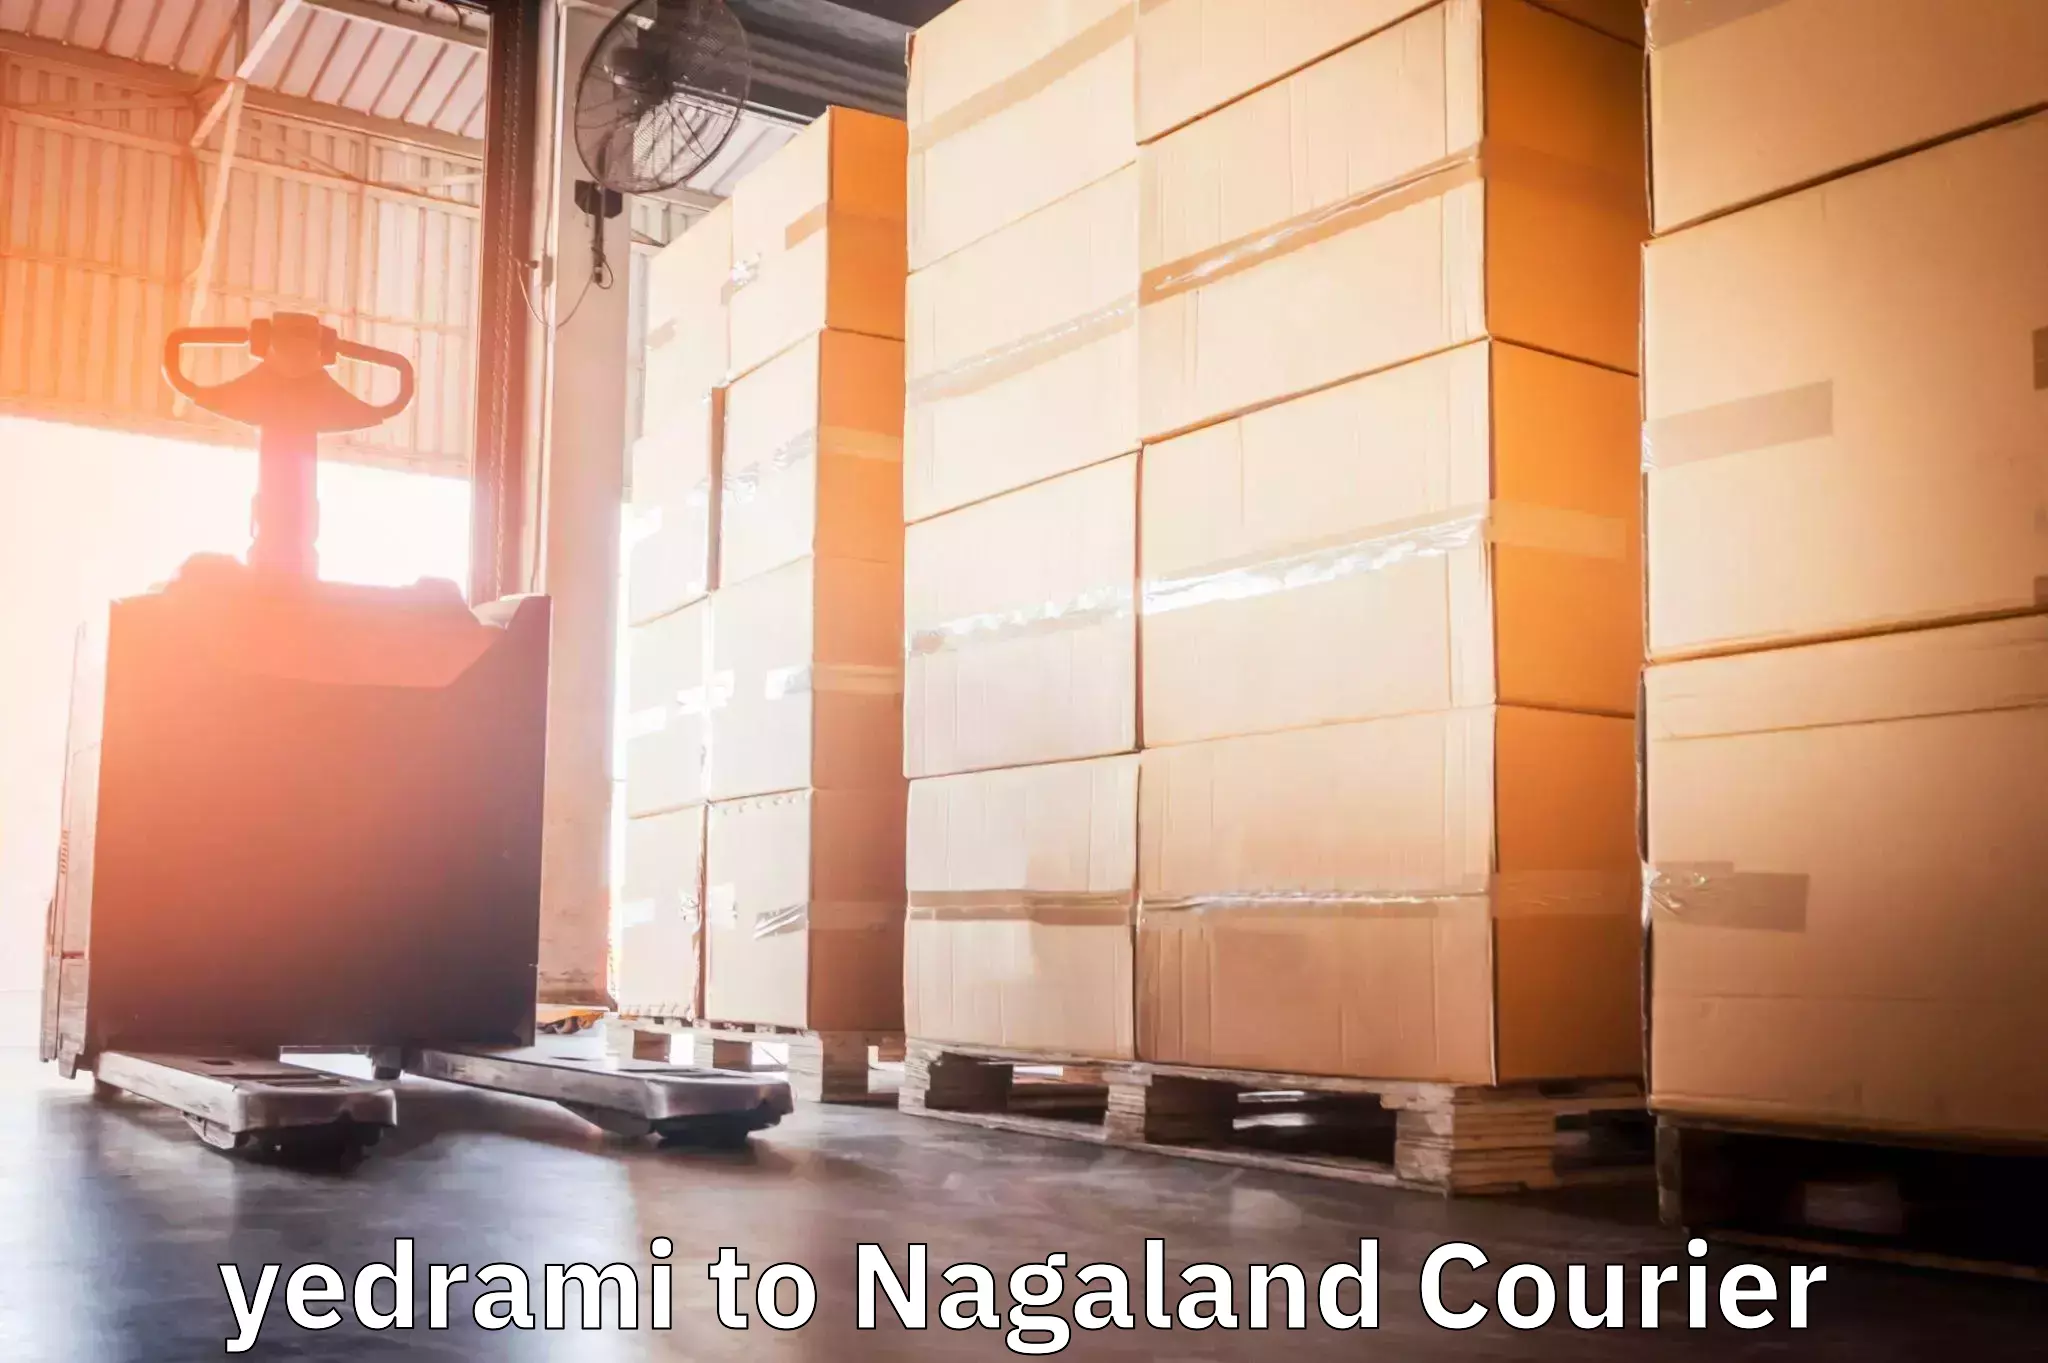 Next-day freight services yedrami to Nagaland